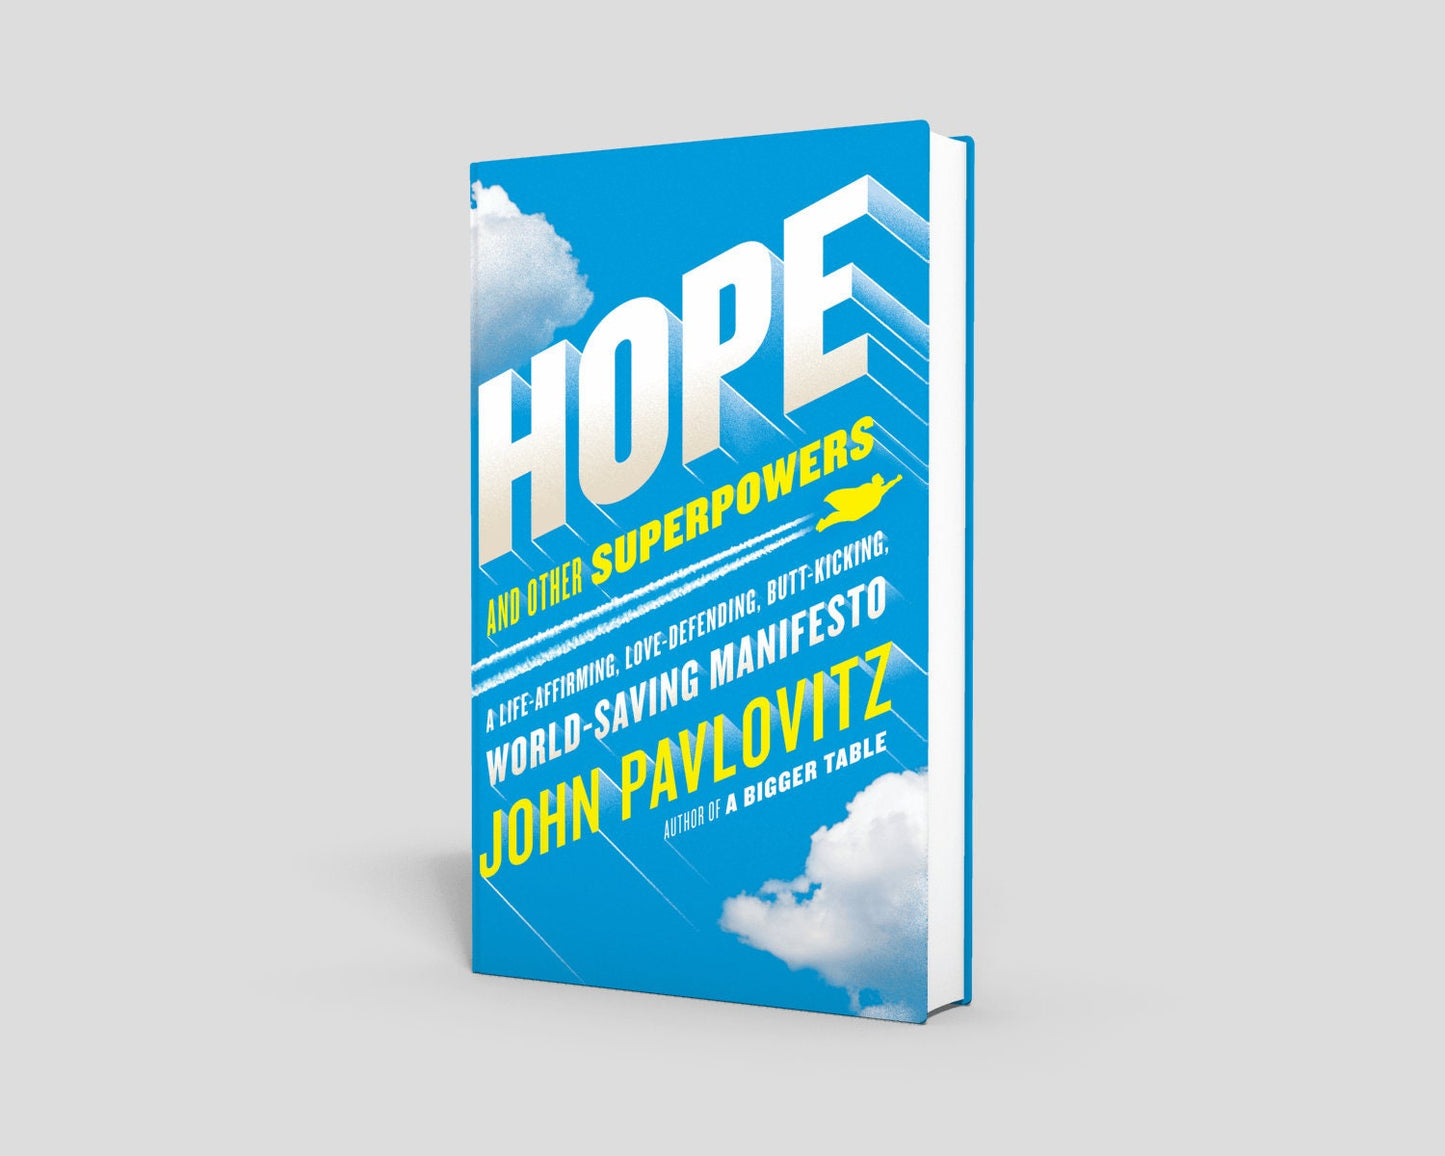 A Signed Copy of ‘Hope and Other Superpowers‘ by John Pavlovitz